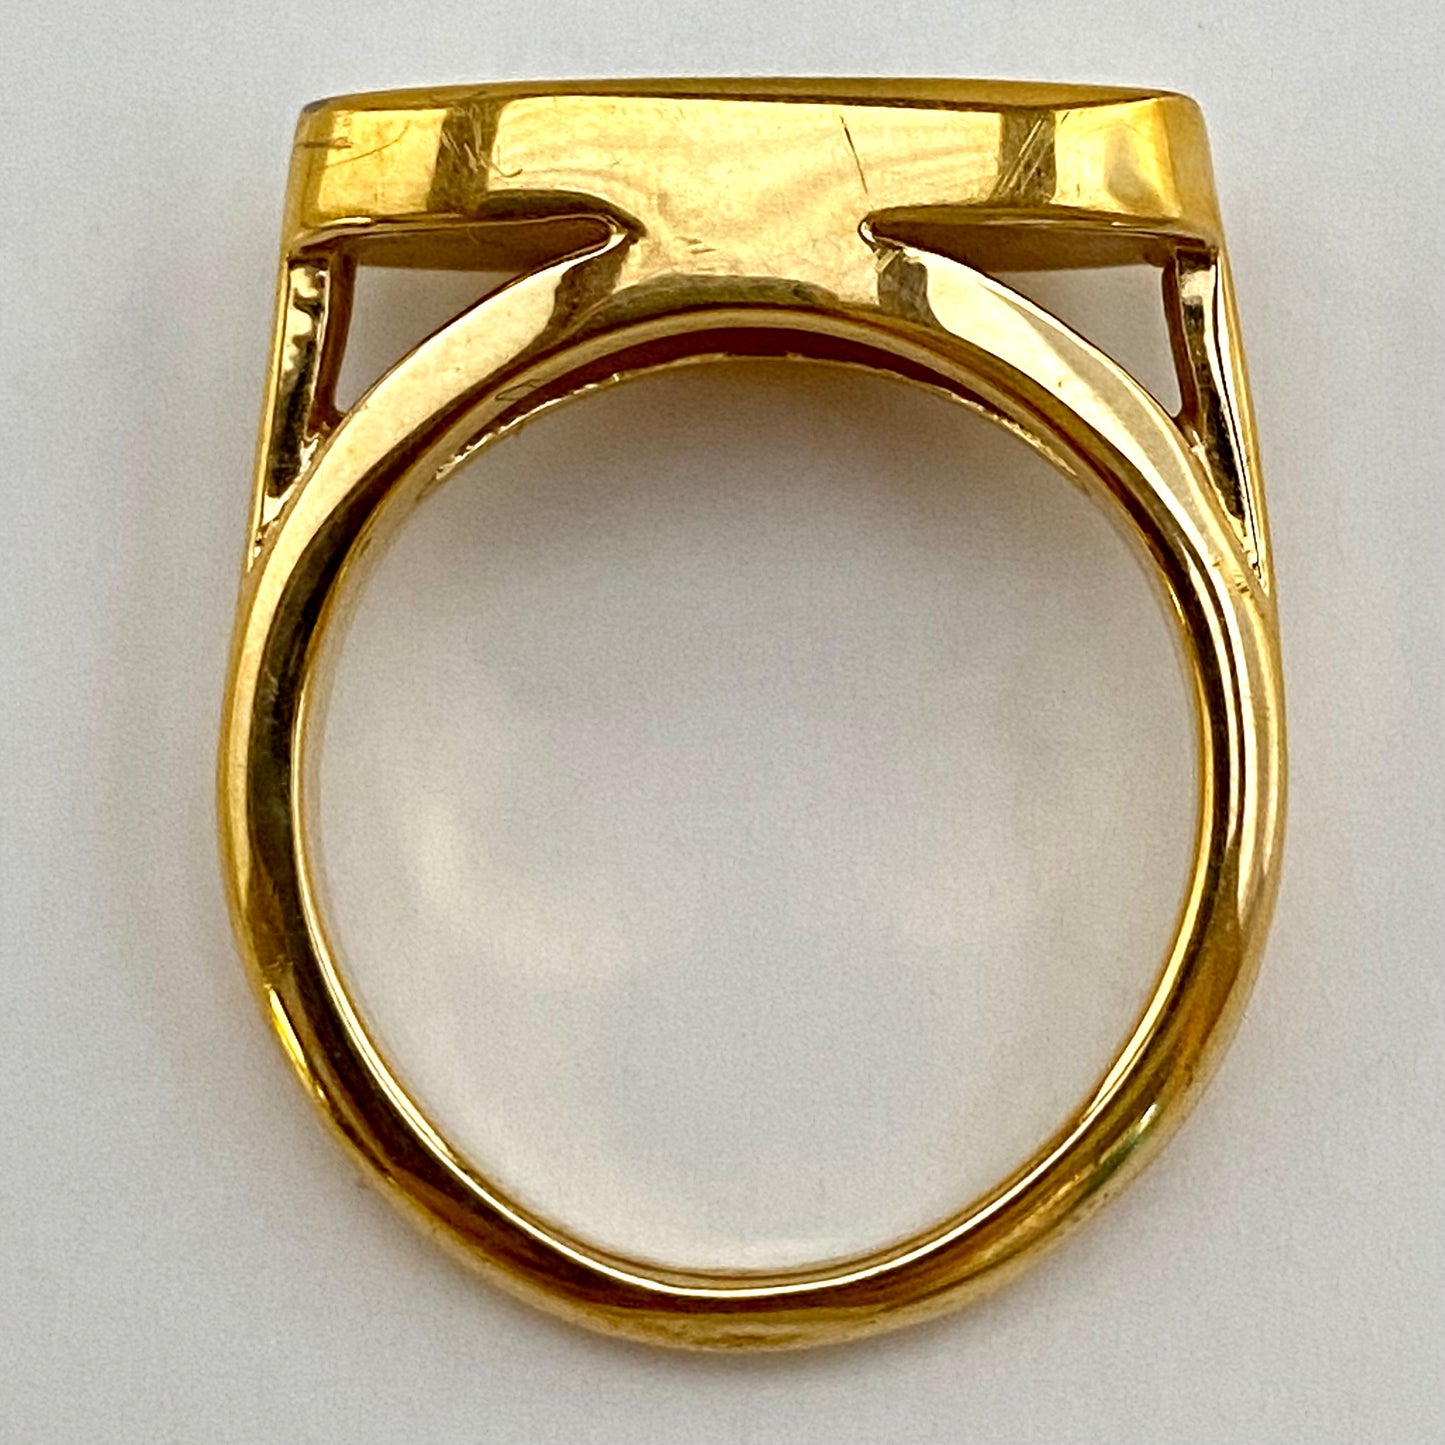 1978 Avon Mother-of-Pearl Ring